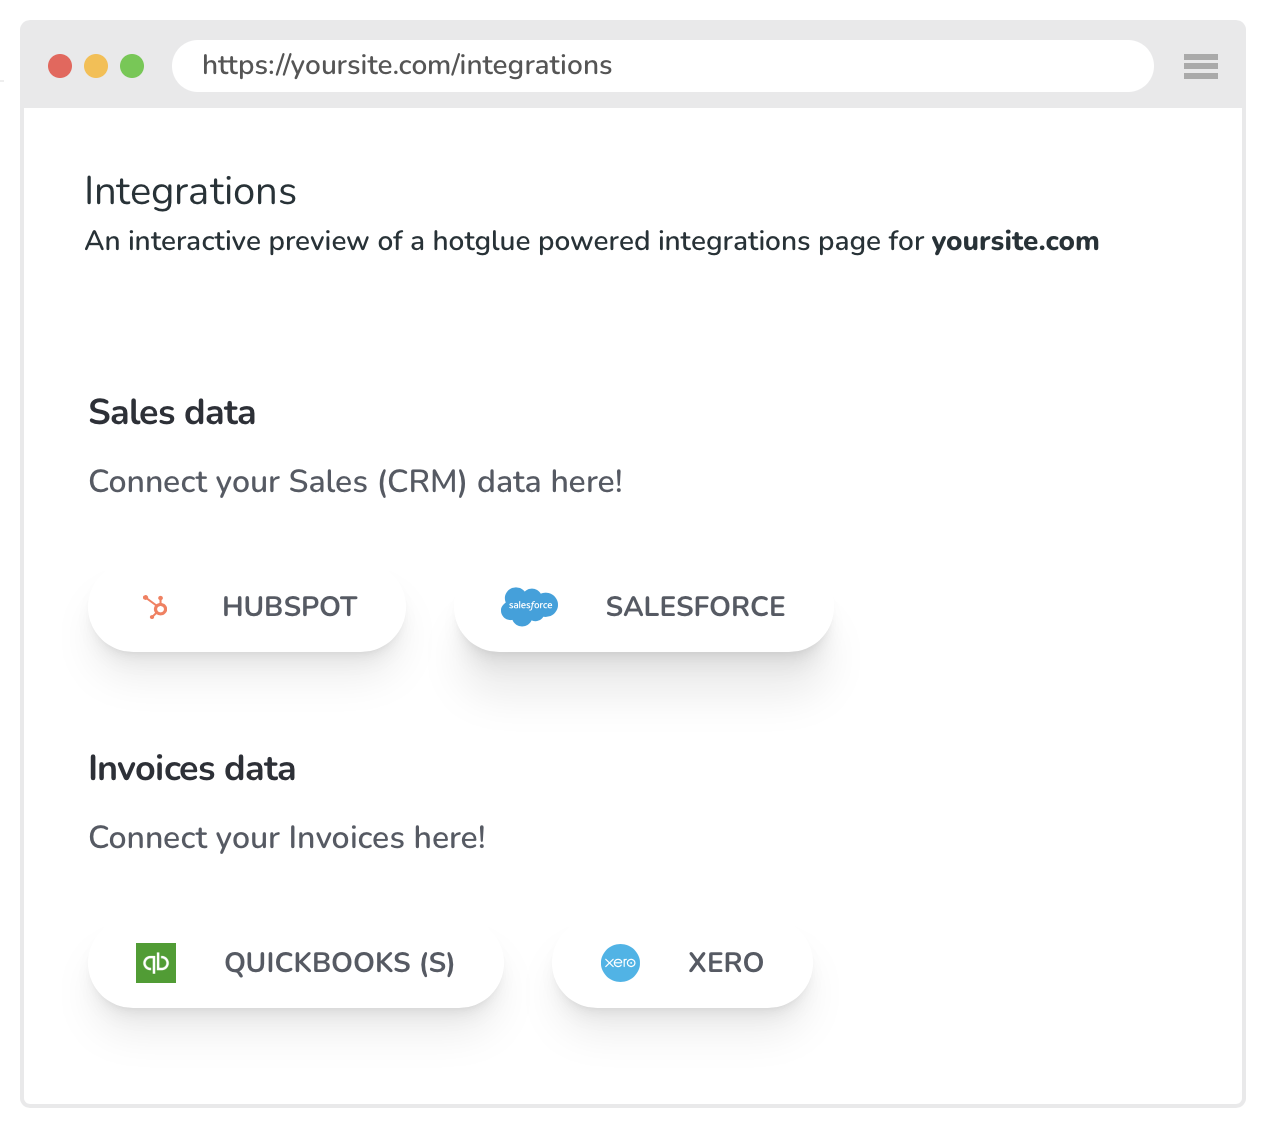 Sample integrations page powered by hotglue-elements